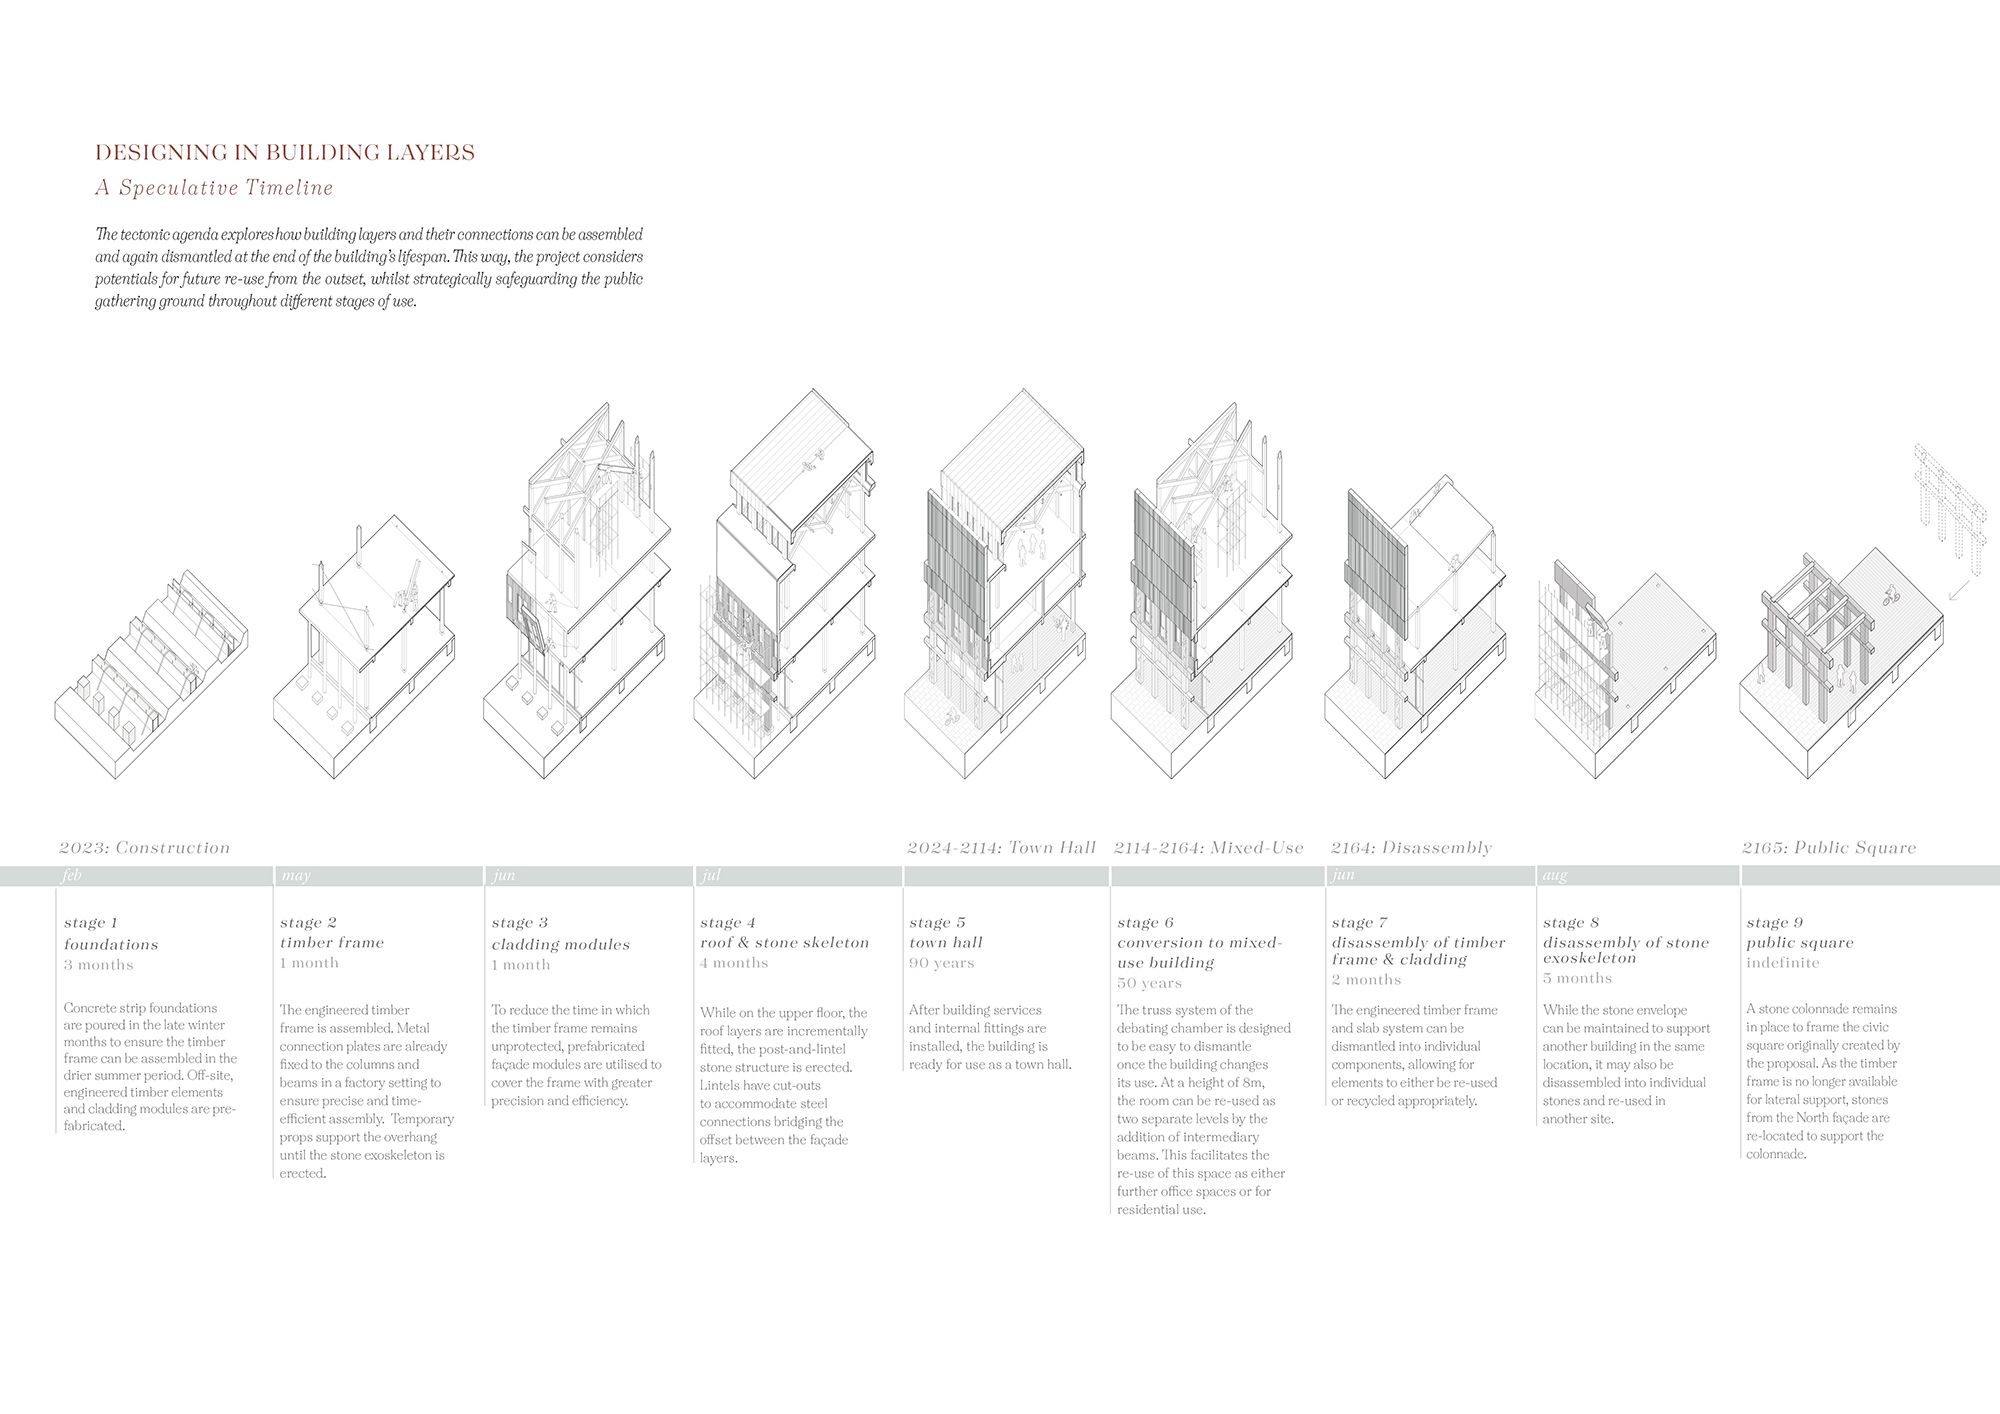 Page 5 of Inka Eismar winning entry to the A&DS and RIAS Scottish Student Awards. The board includes 9 technical illustrations of the building layers in a timeline format from 2023-2165.